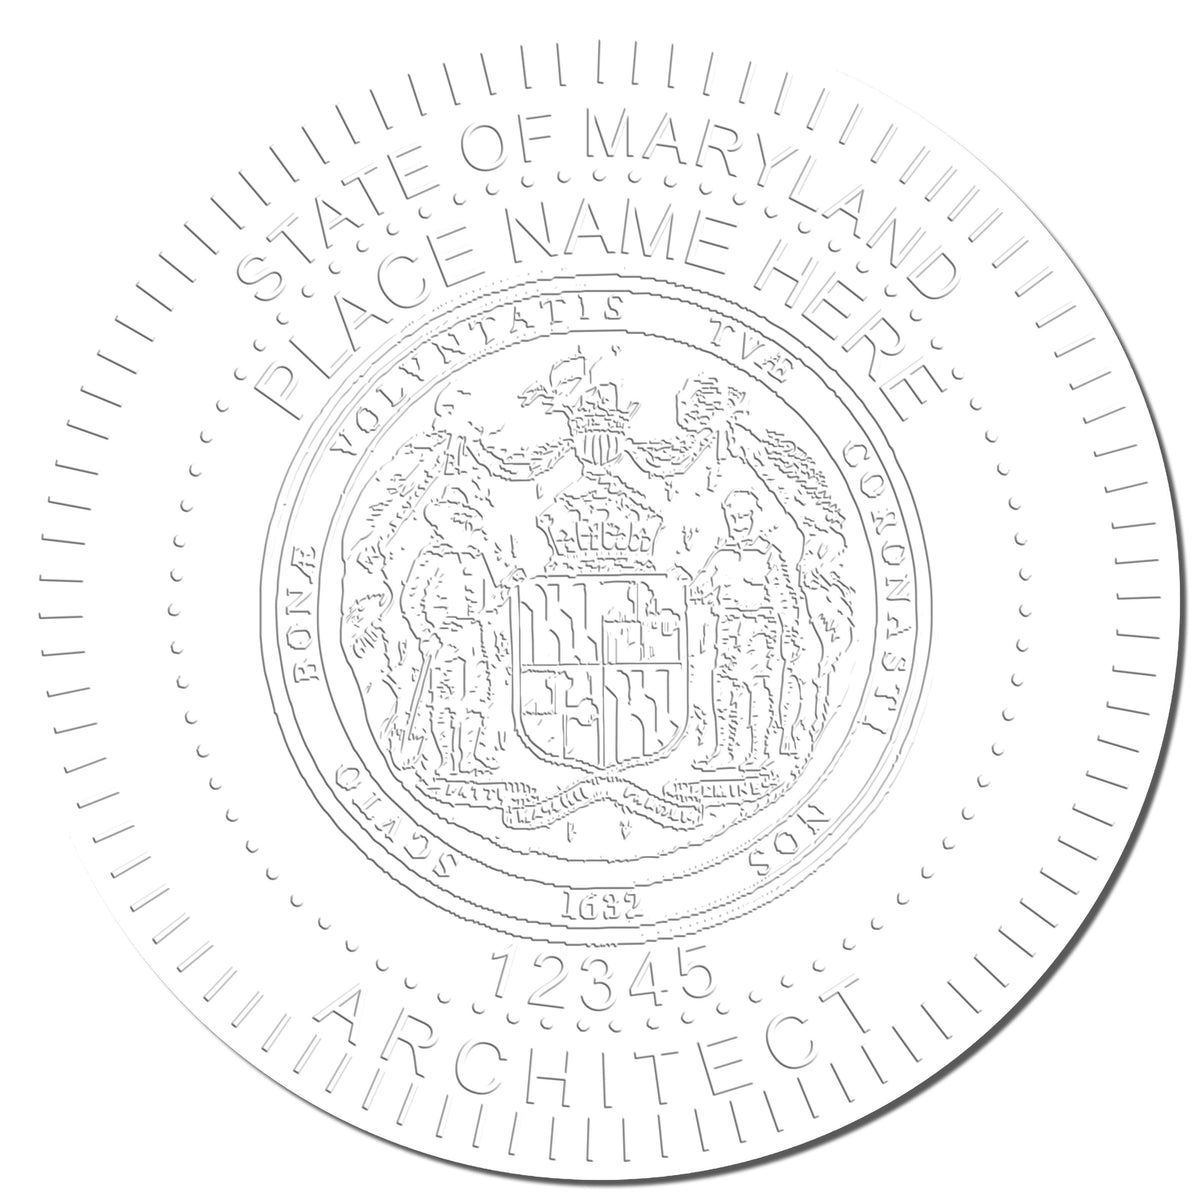 This paper is stamped with a sample imprint of the Hybrid Maryland Architect Seal, signifying its quality and reliability.